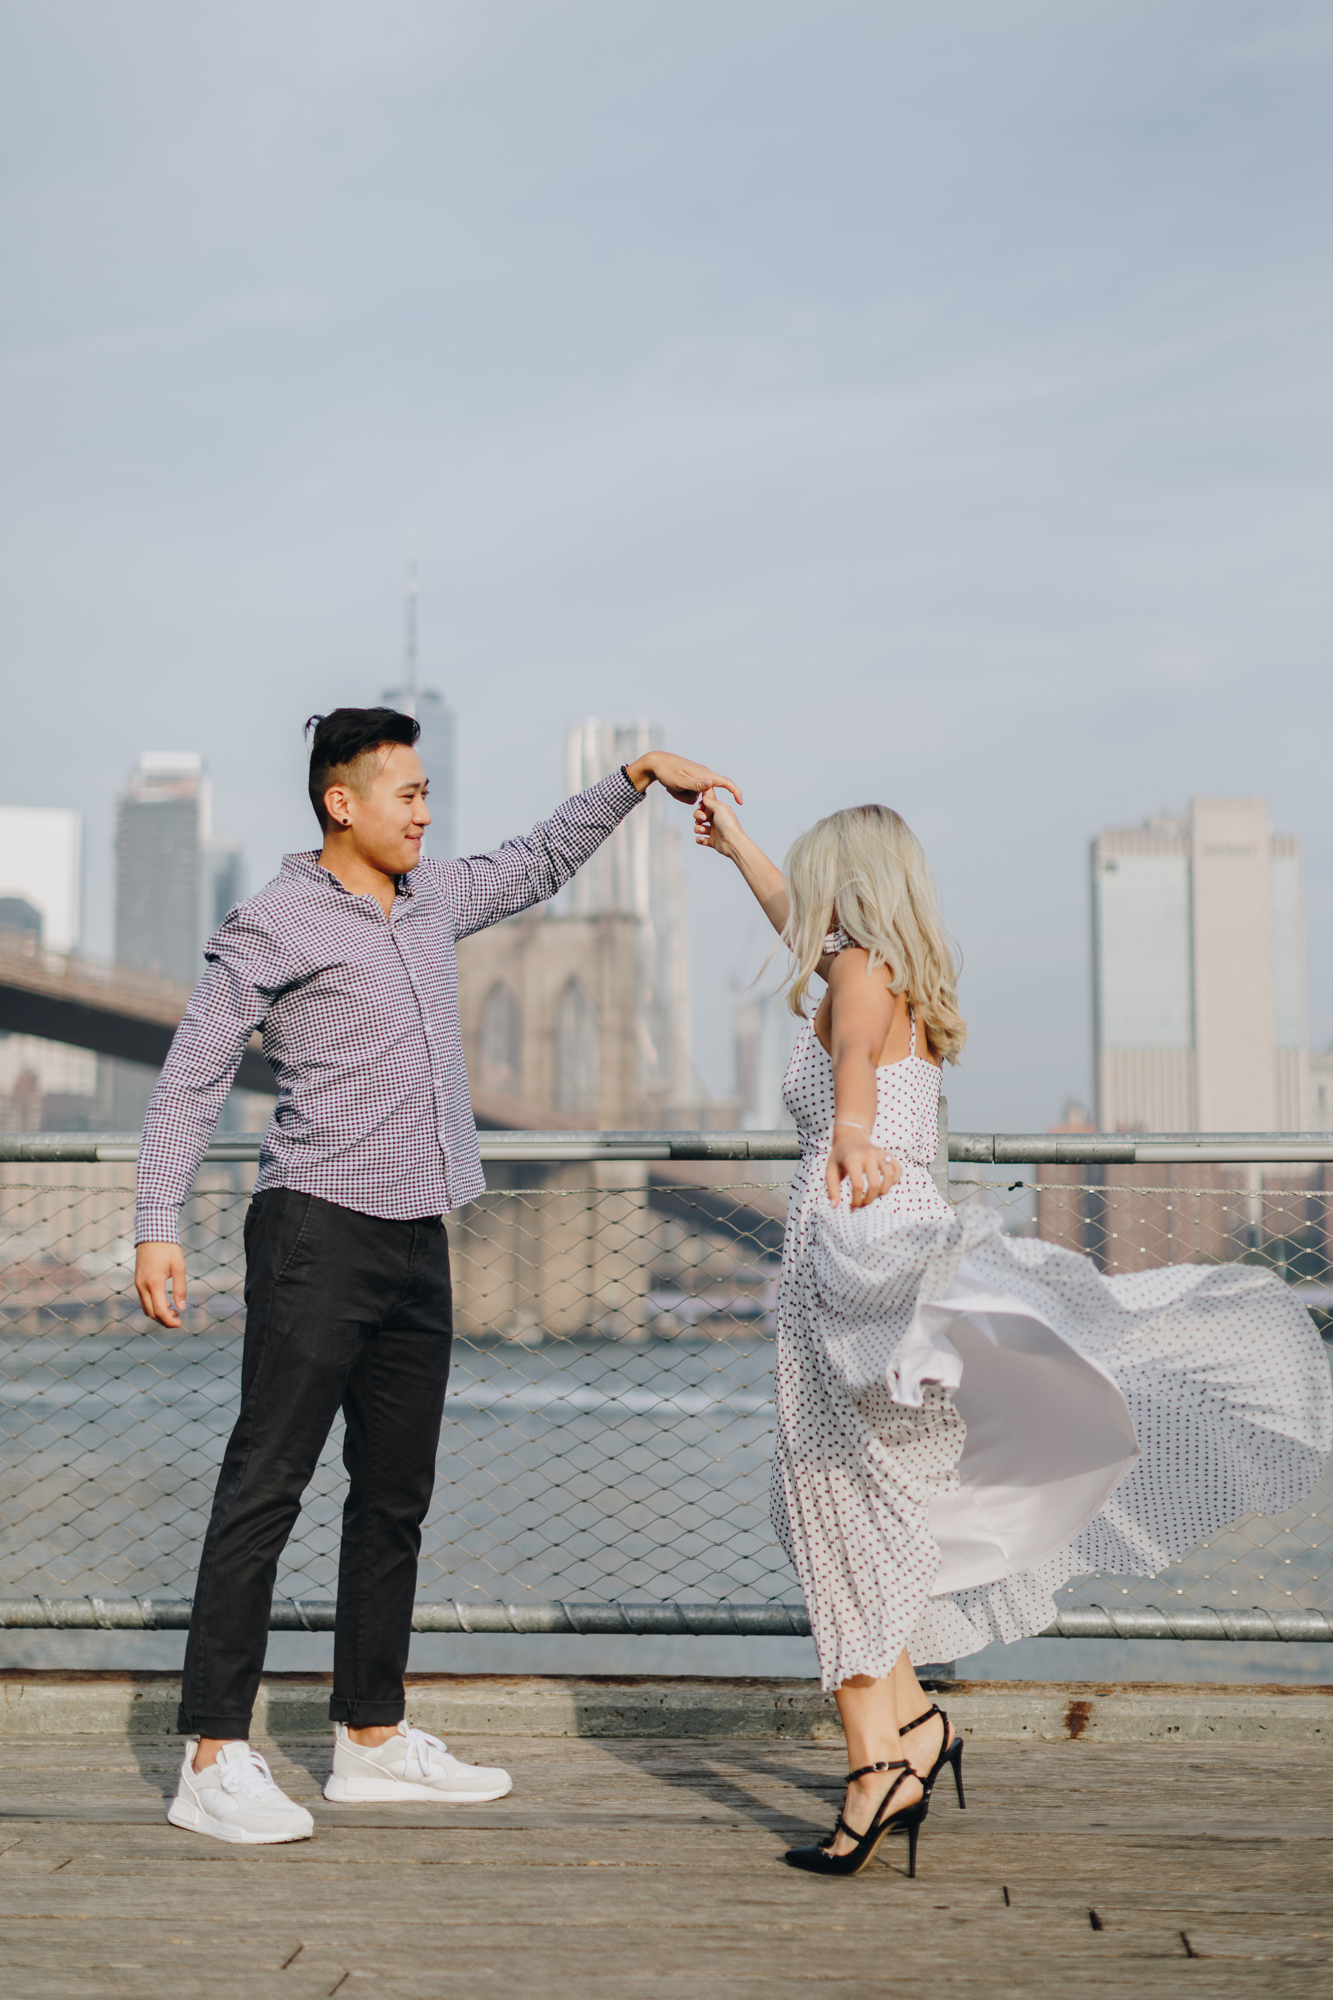 Dazzling Fall Engagement Photos in DUMBO